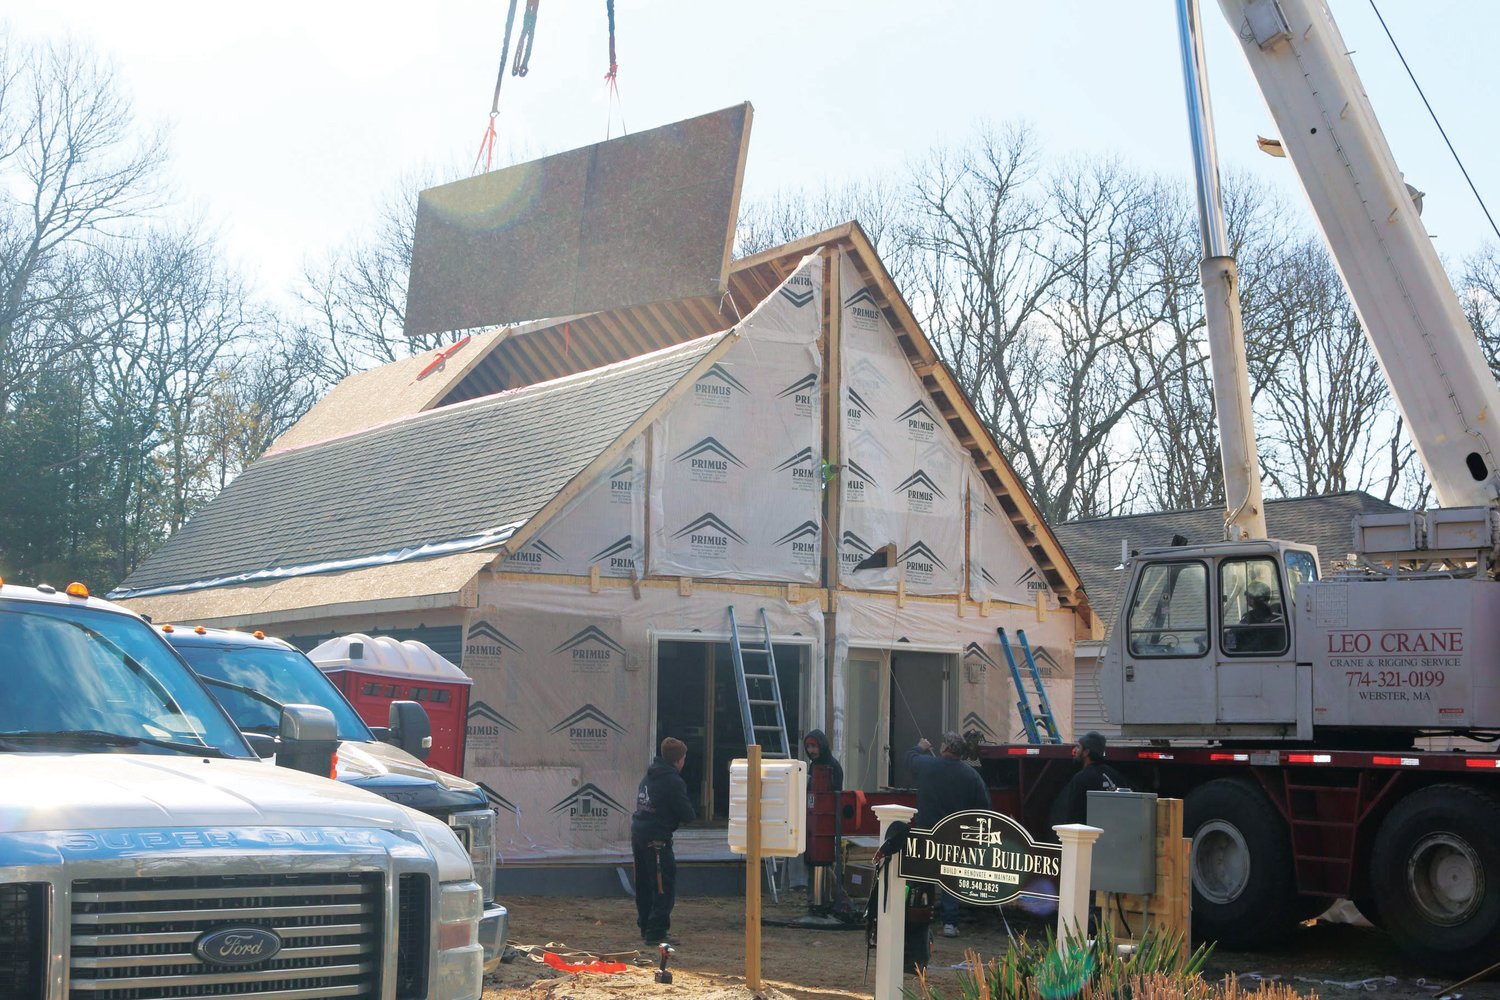 Crews assemble sections of a modular home in Falmouth, Mass.